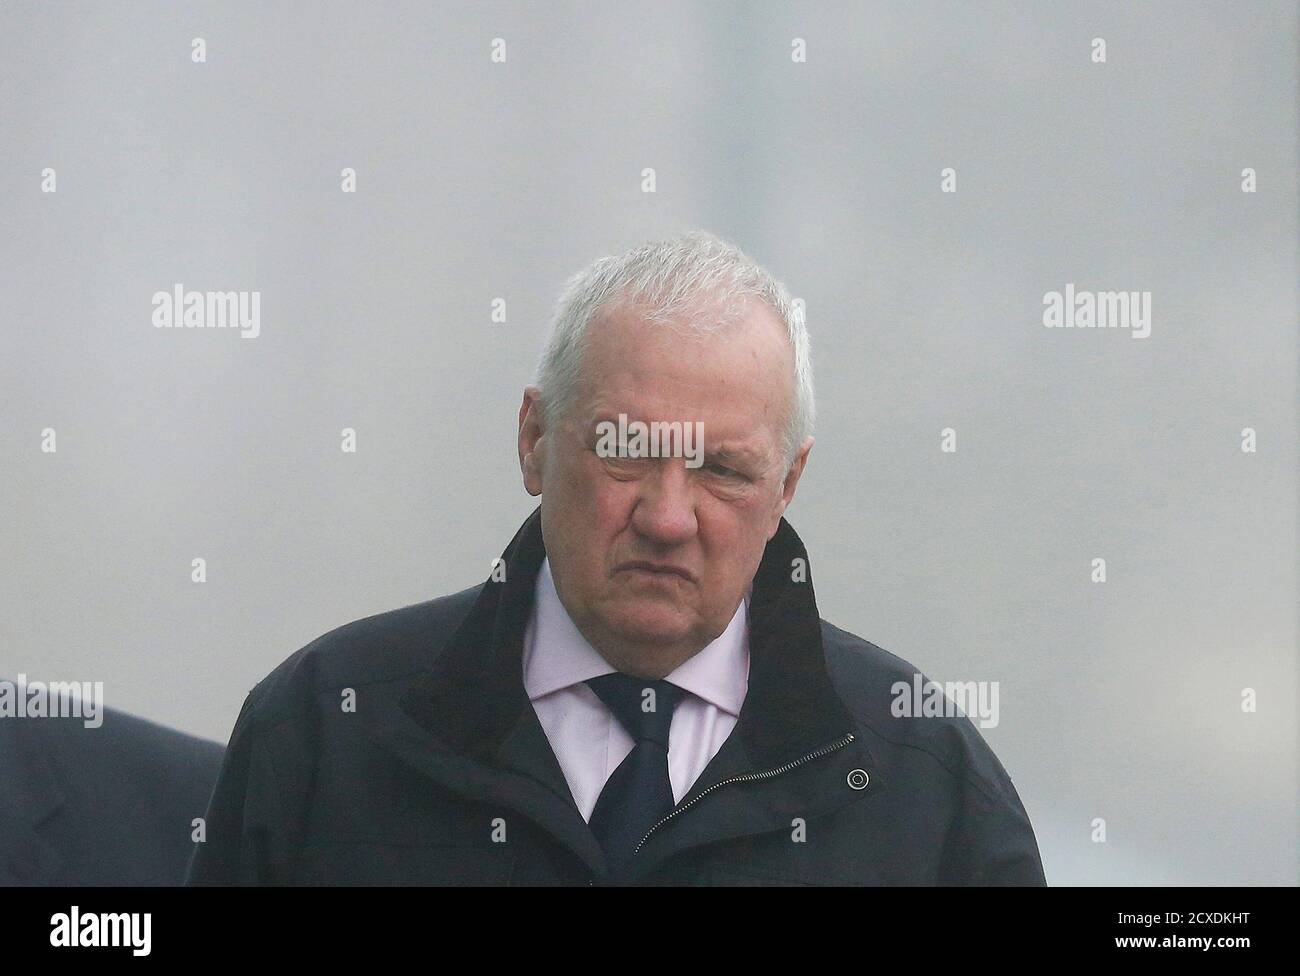 Former Chief Superintendent of South Yorkshire Police David Duckenfield arrives to give evidence to the Hillsborough Inquest in Warrington, northern England March 18, 2015. Duckenfield was match commander at the 1989 Hillsborough disaster, that claimed the lives of 96 men, women and children. REUTERS/PHIL NOBLE   (BRITAIN - Tags: POLITICS CRIME LAW SPORT SOCCER) Stock Photo